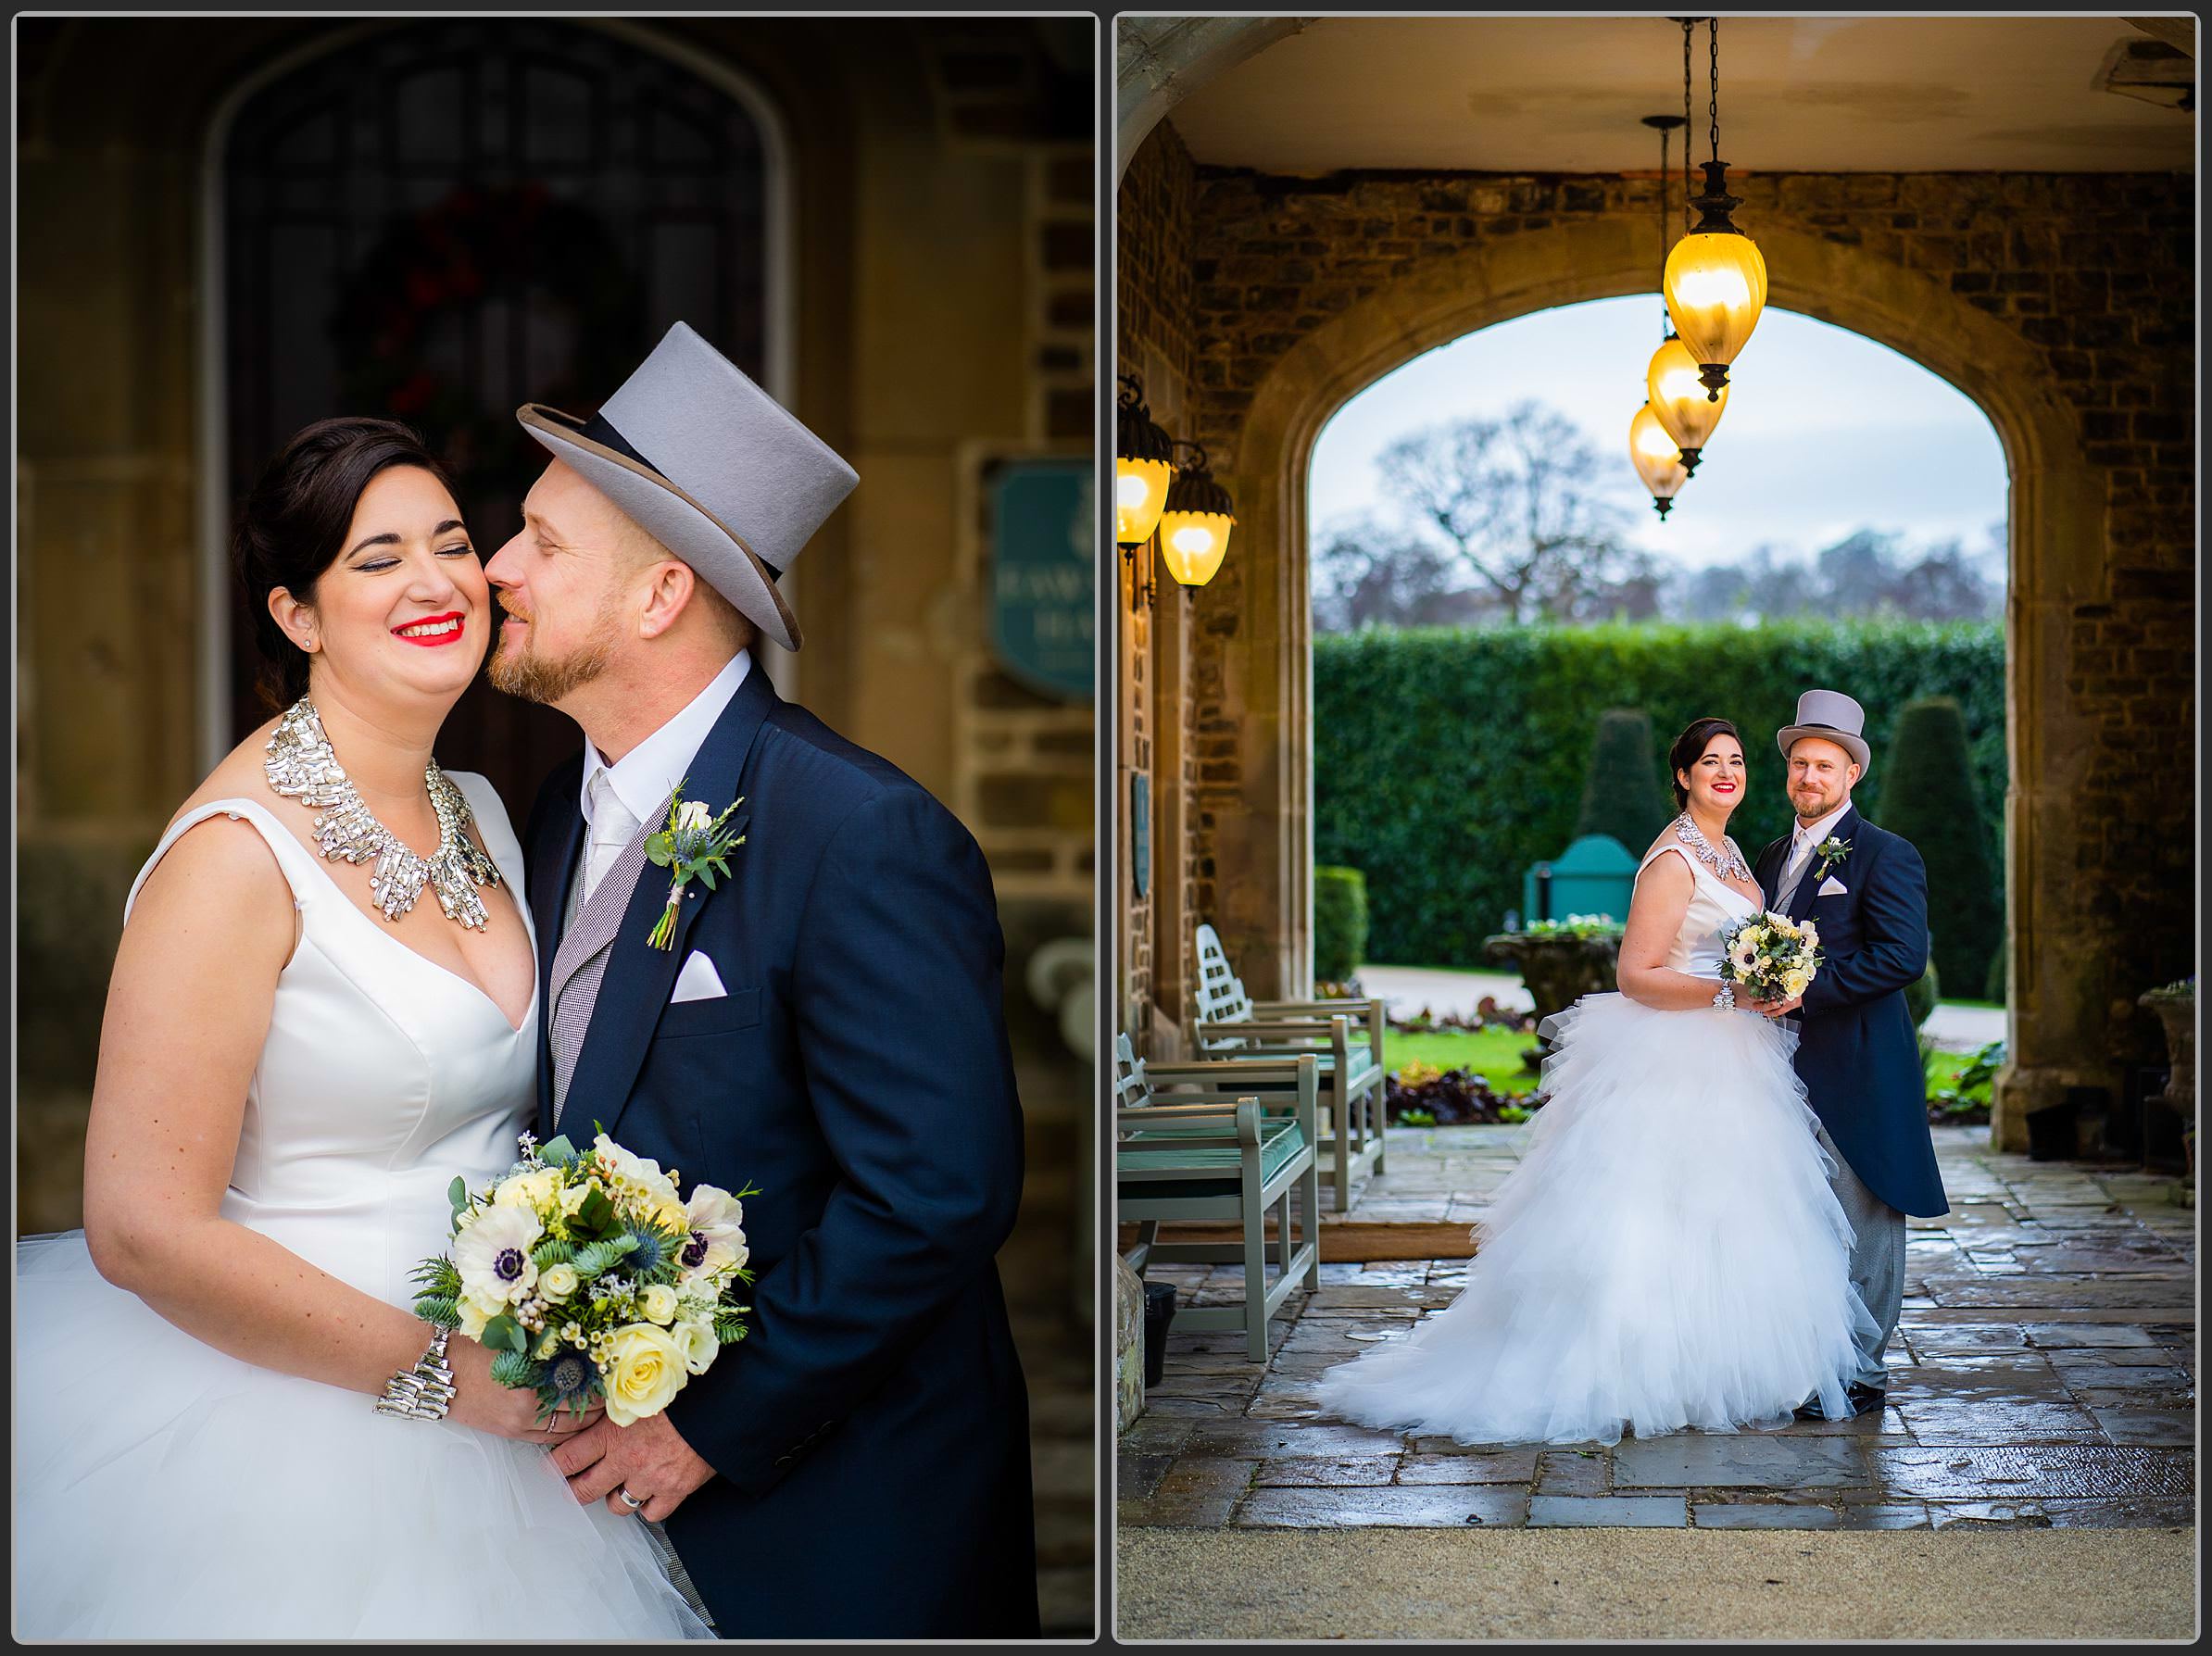 The bride and groom together at Fawsley Hall Hotel